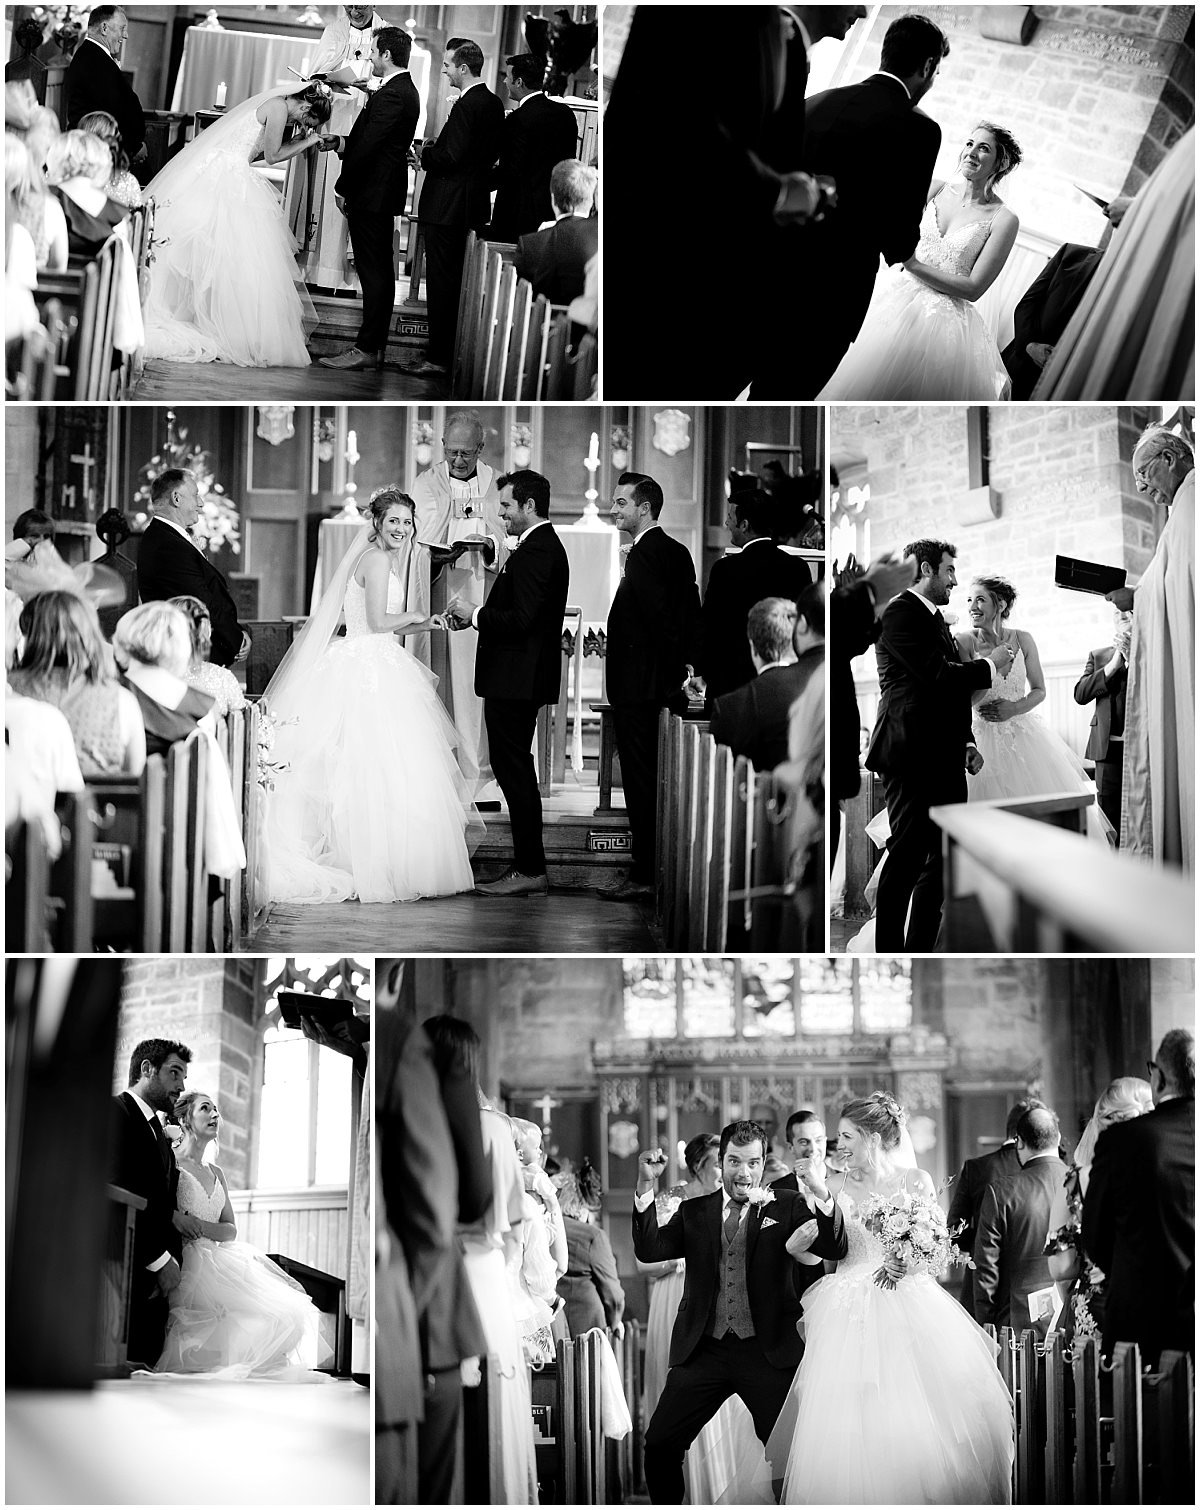 Church ceremony in black and white